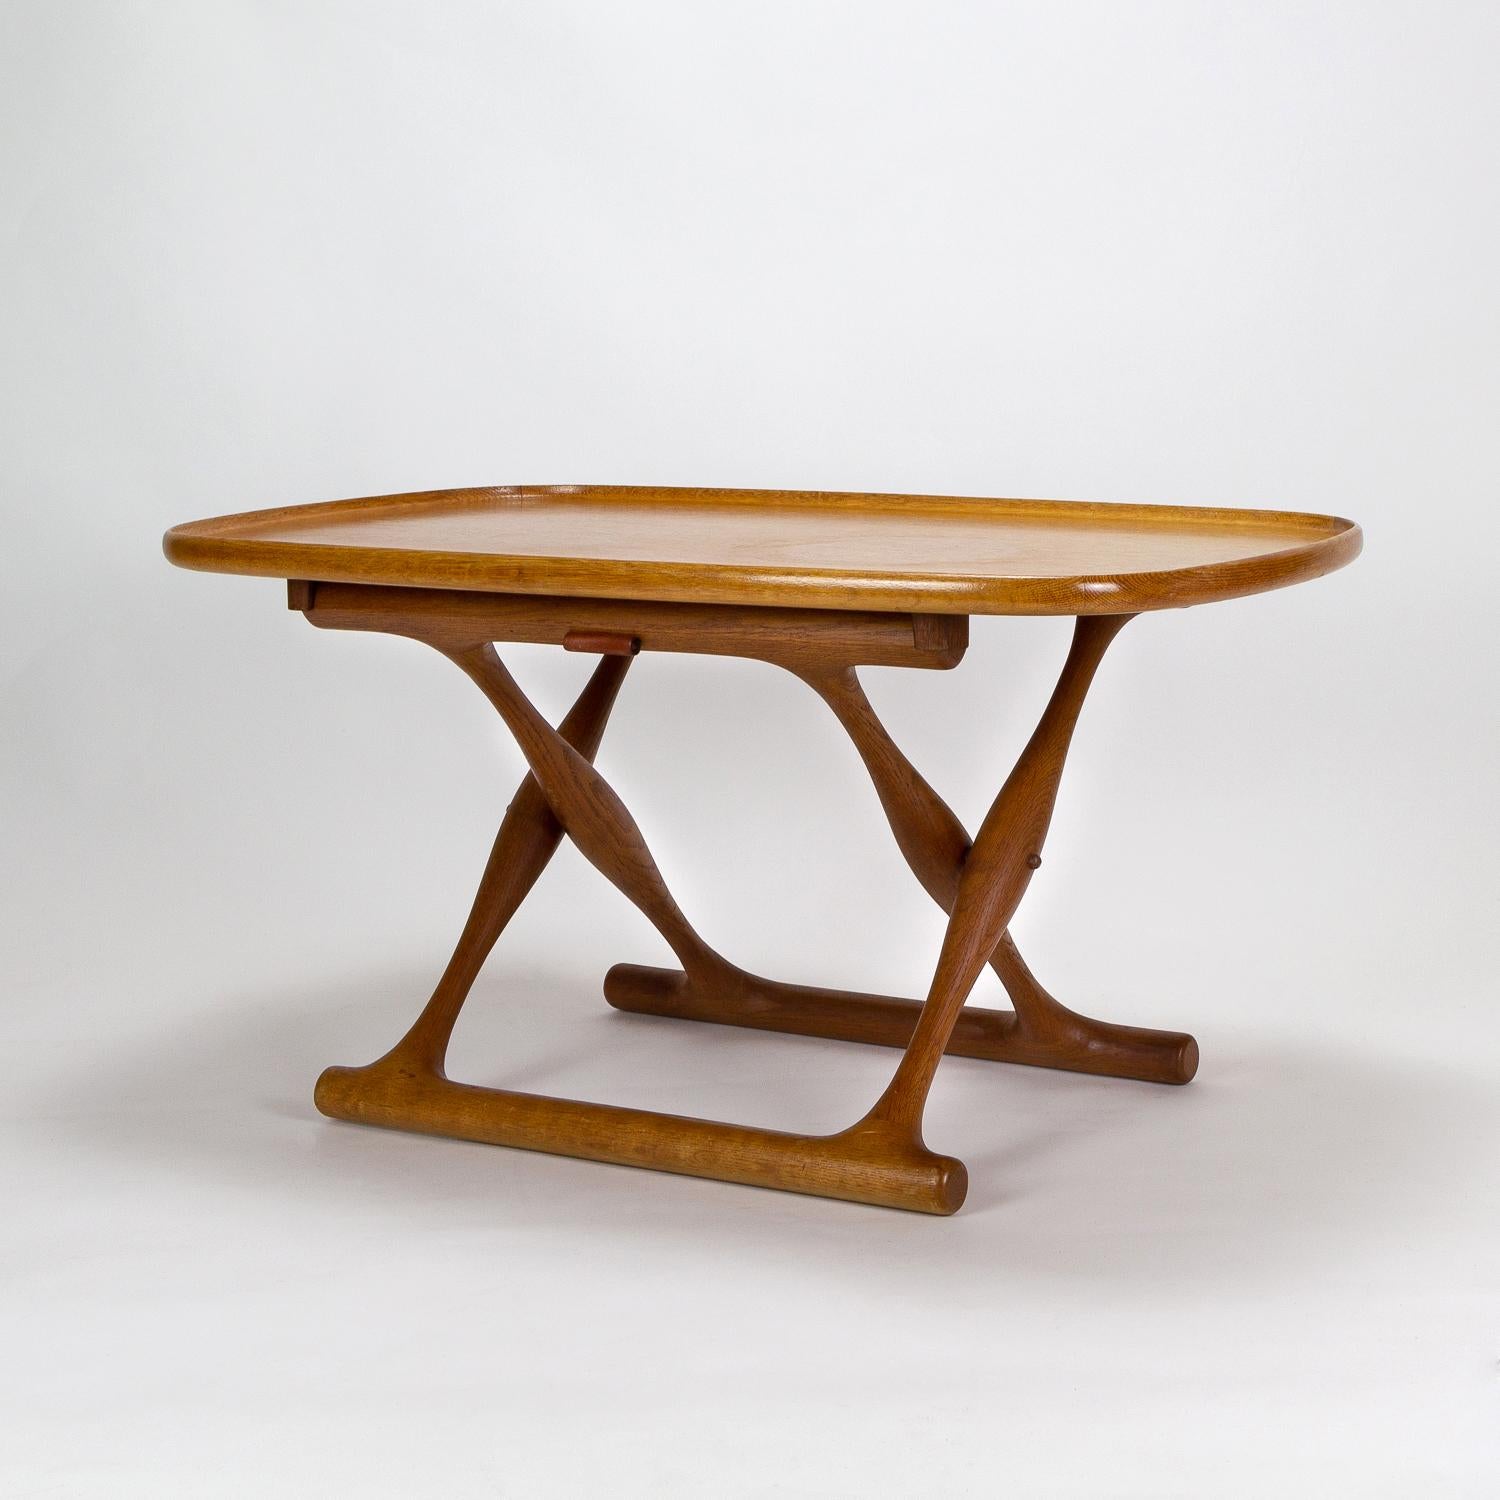 Poul Hundevad Egyptian Gulhøj folding tray table in oak and leather. Made by Domus Danica, Denmark, 1950s. Excellent original condition.

 